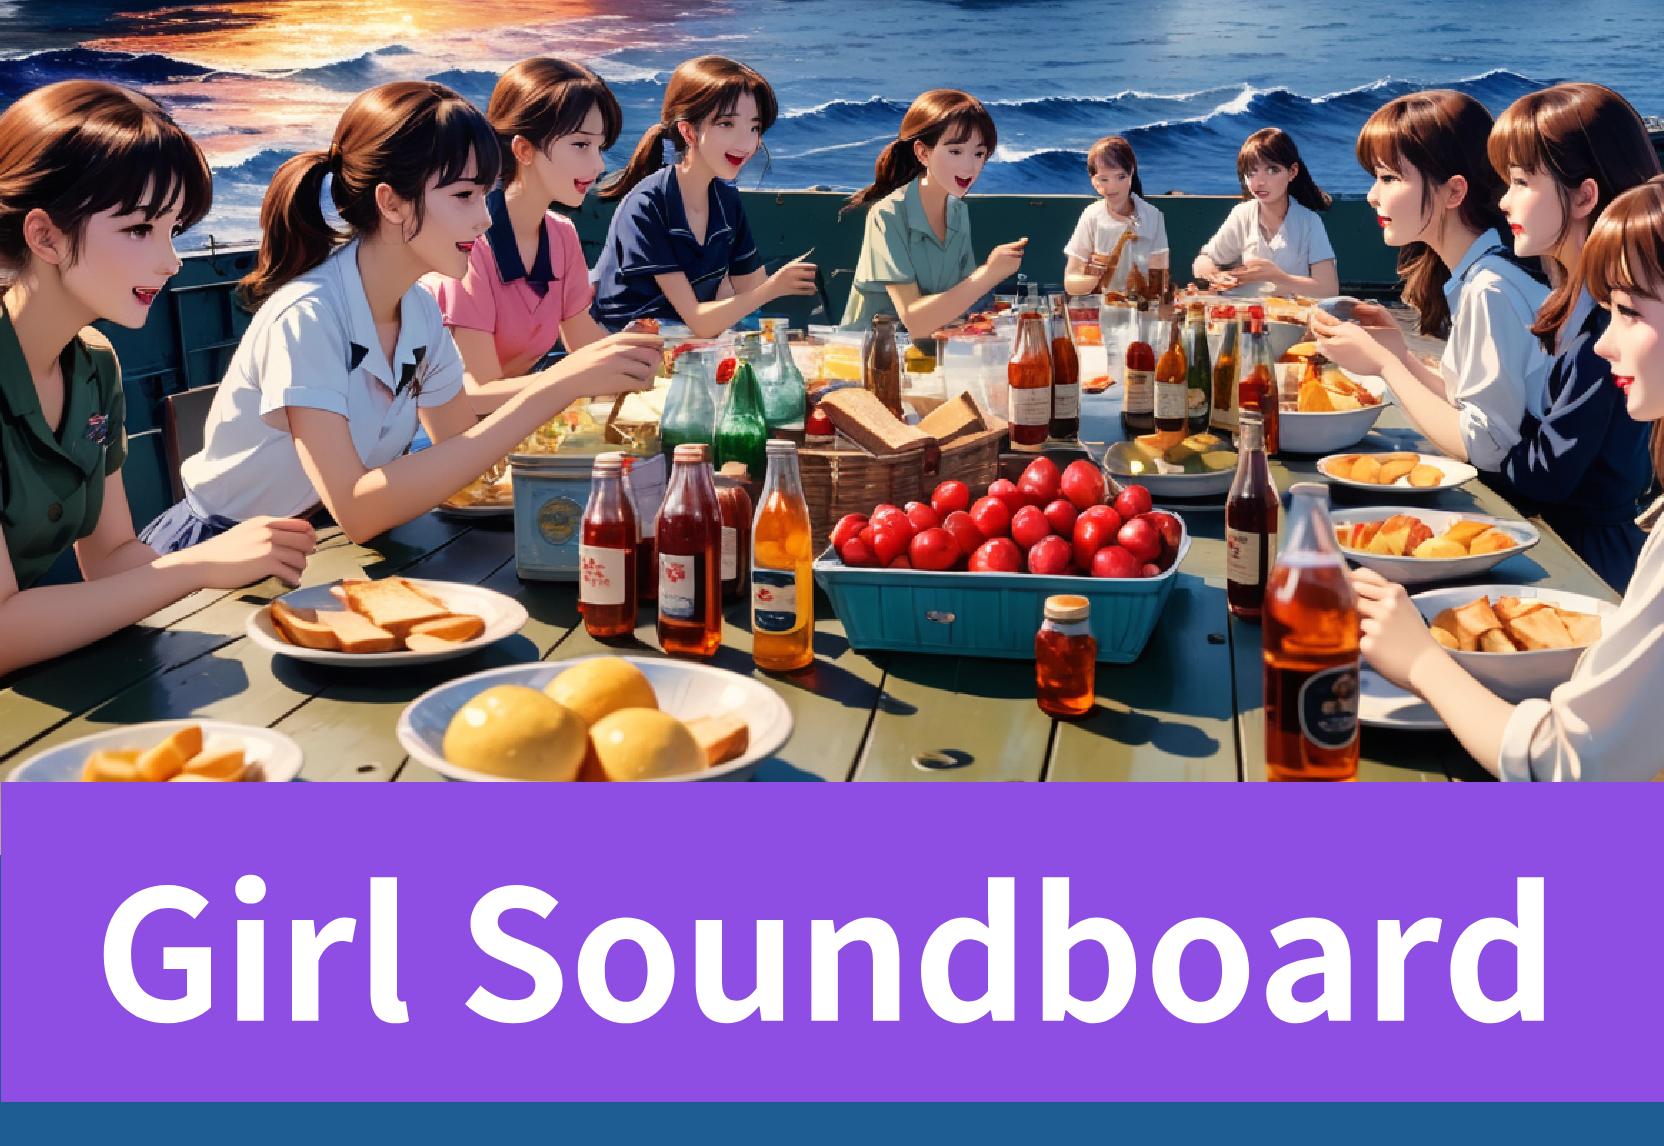 Spice Up Your Streams with Girl Soundboard Sounds